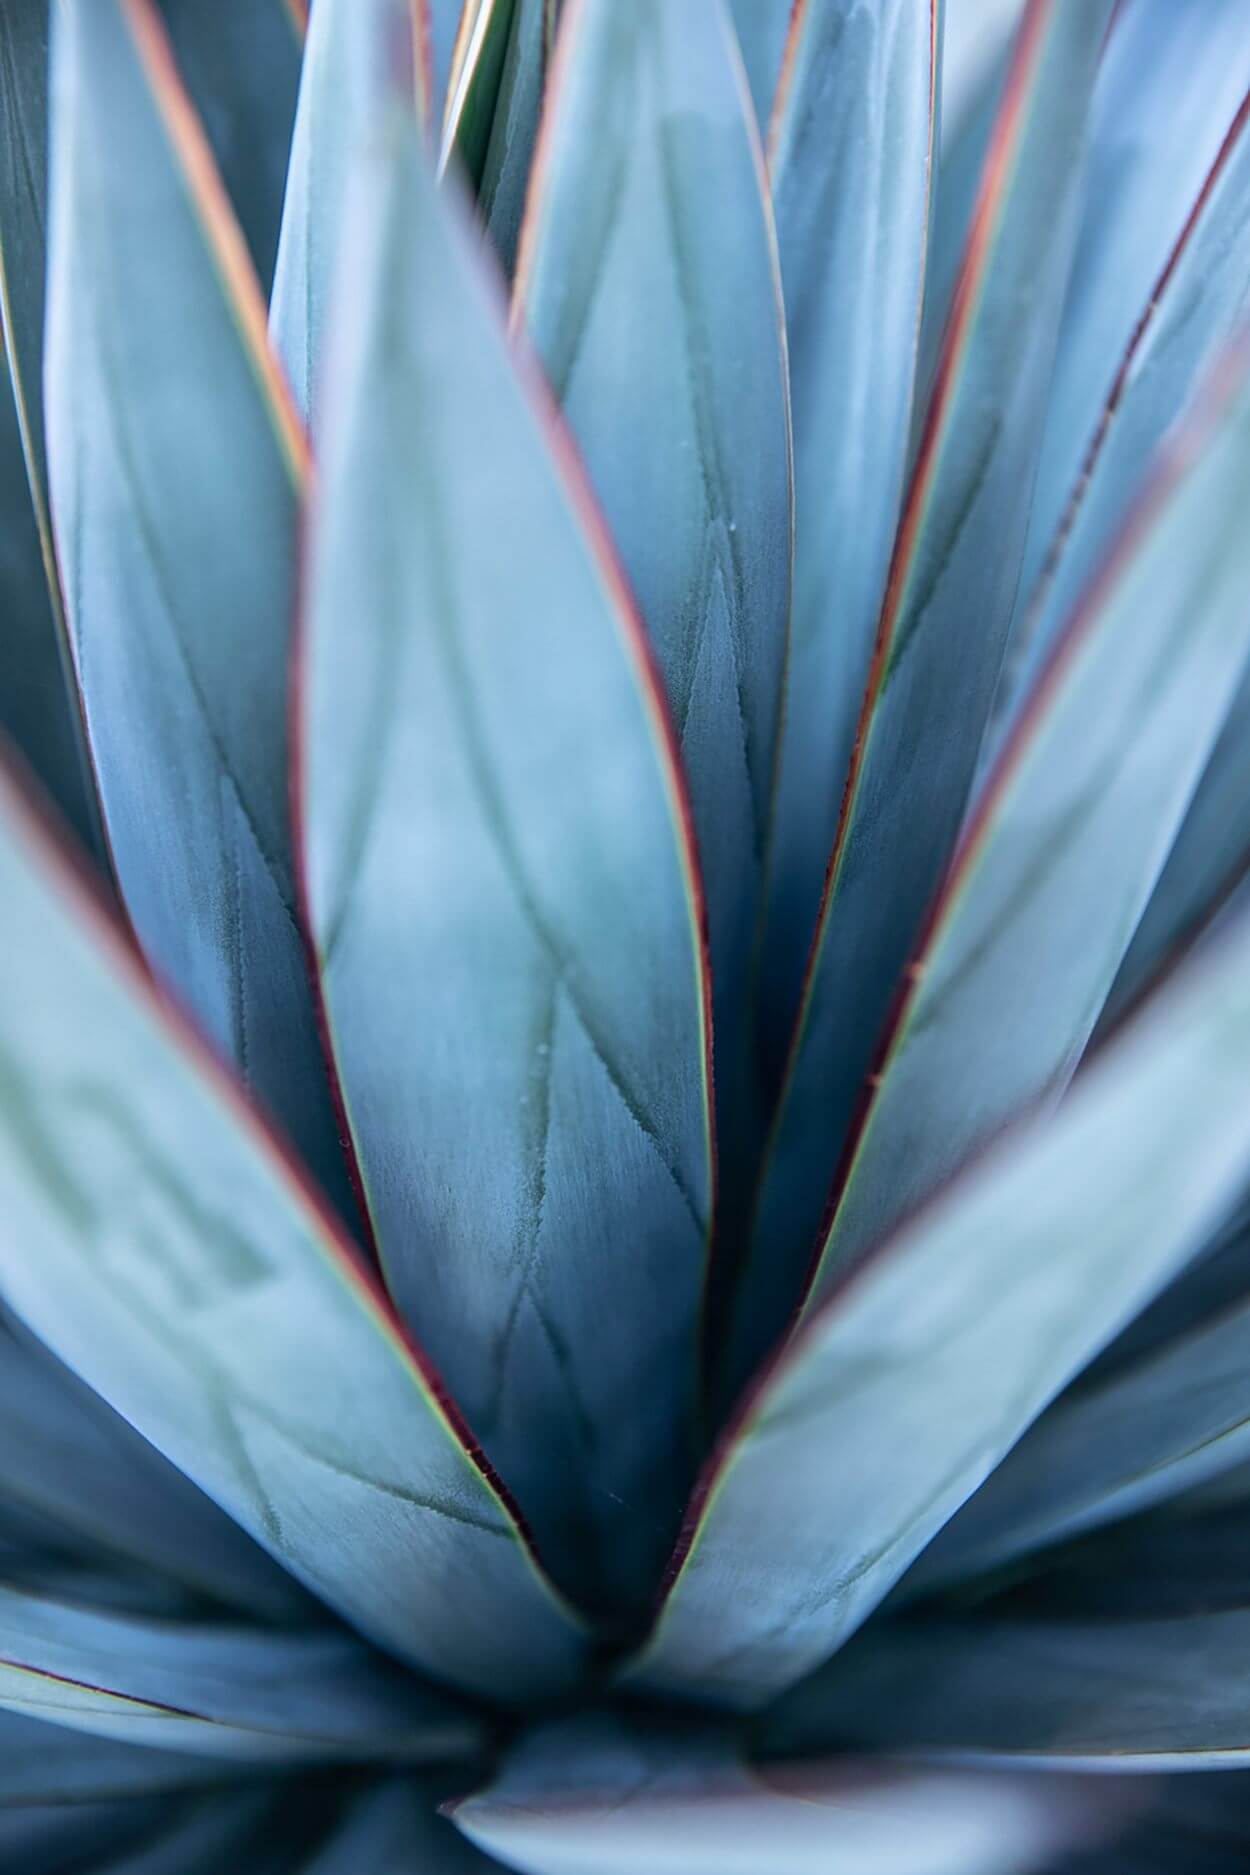 Blue Flame Agave 